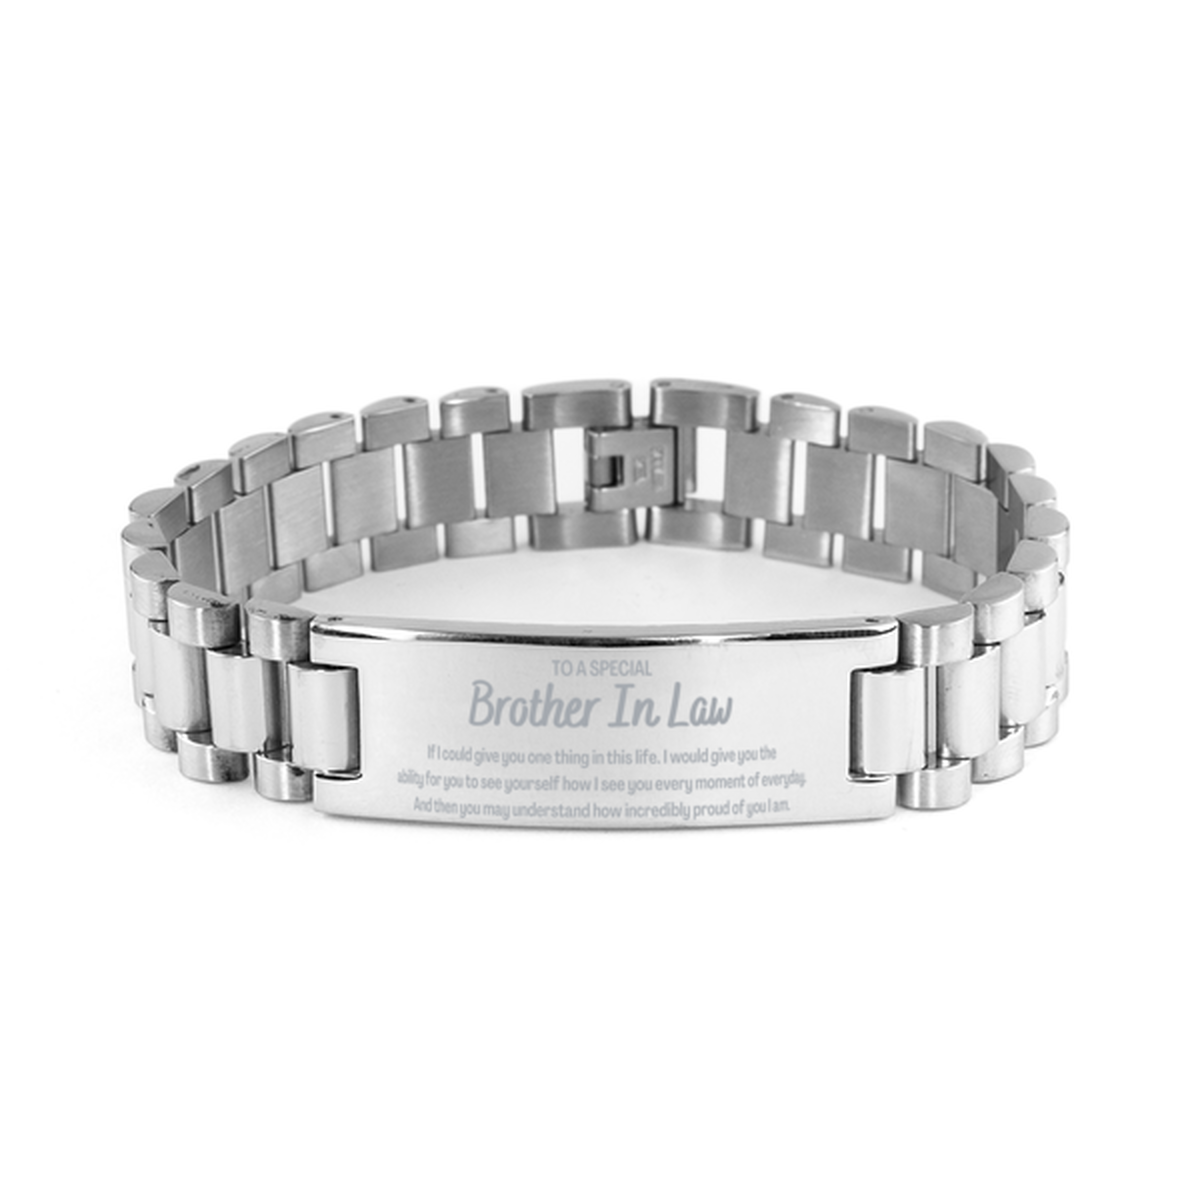 To My Brother In Law Ladder Stainless Steel Bracelet, Gifts For Brother In Law Engraved, Inspirational Gifts for Christmas Birthday, Epic Gifts for Brother In Law To A Special Brother In Law how incredibly proud of you I am